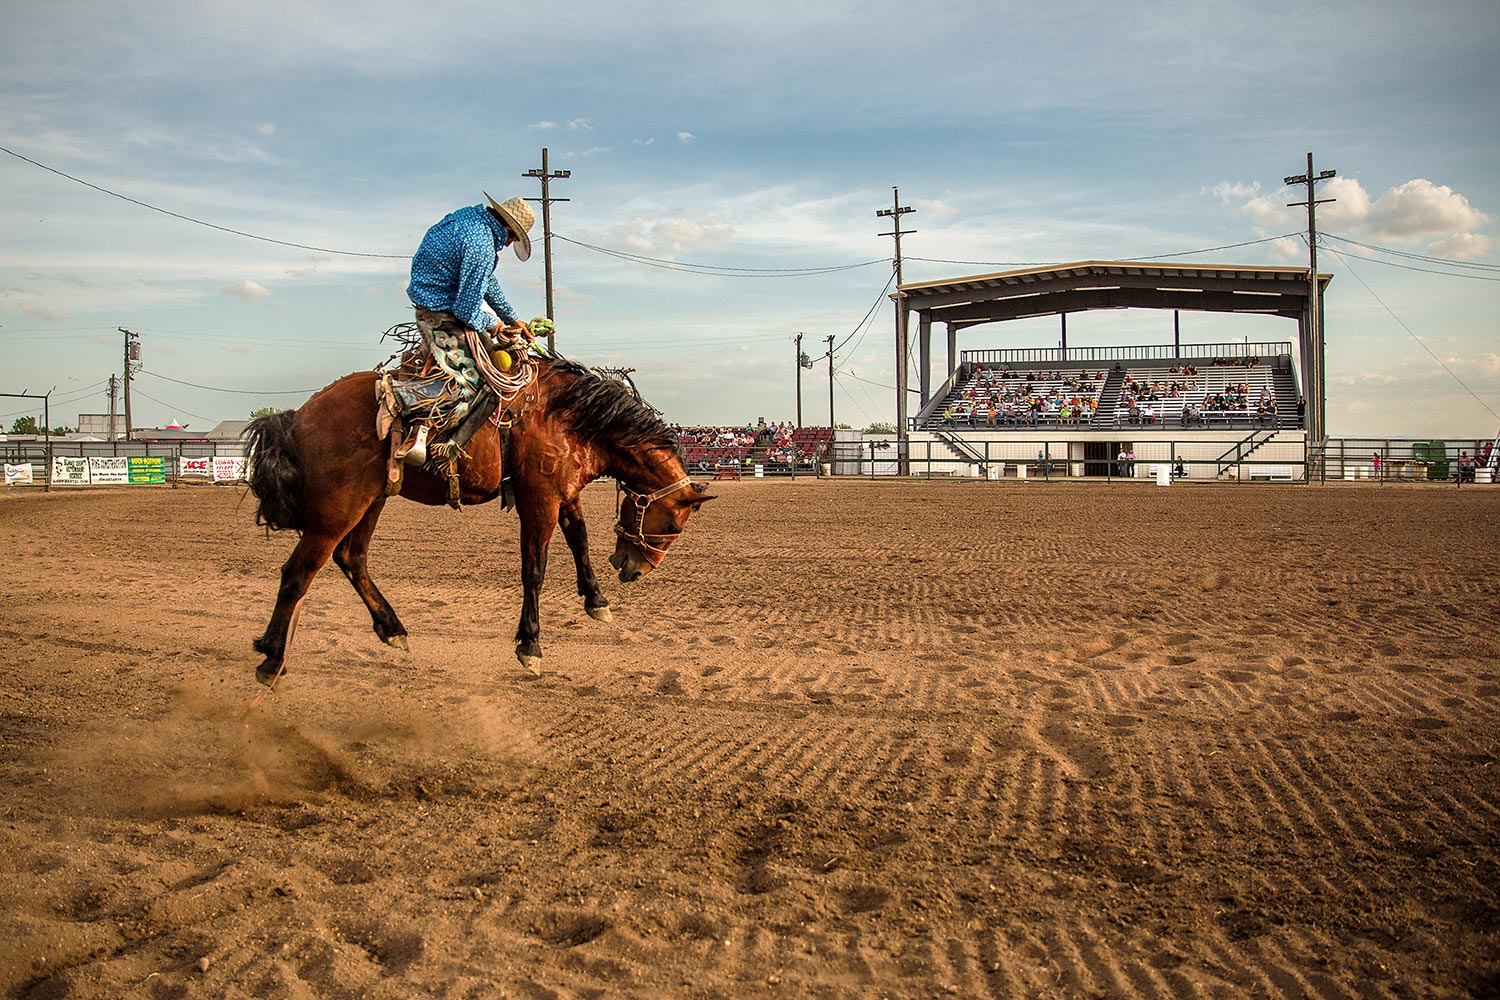 20+ photos of the rodeo at the Blaine County Fair